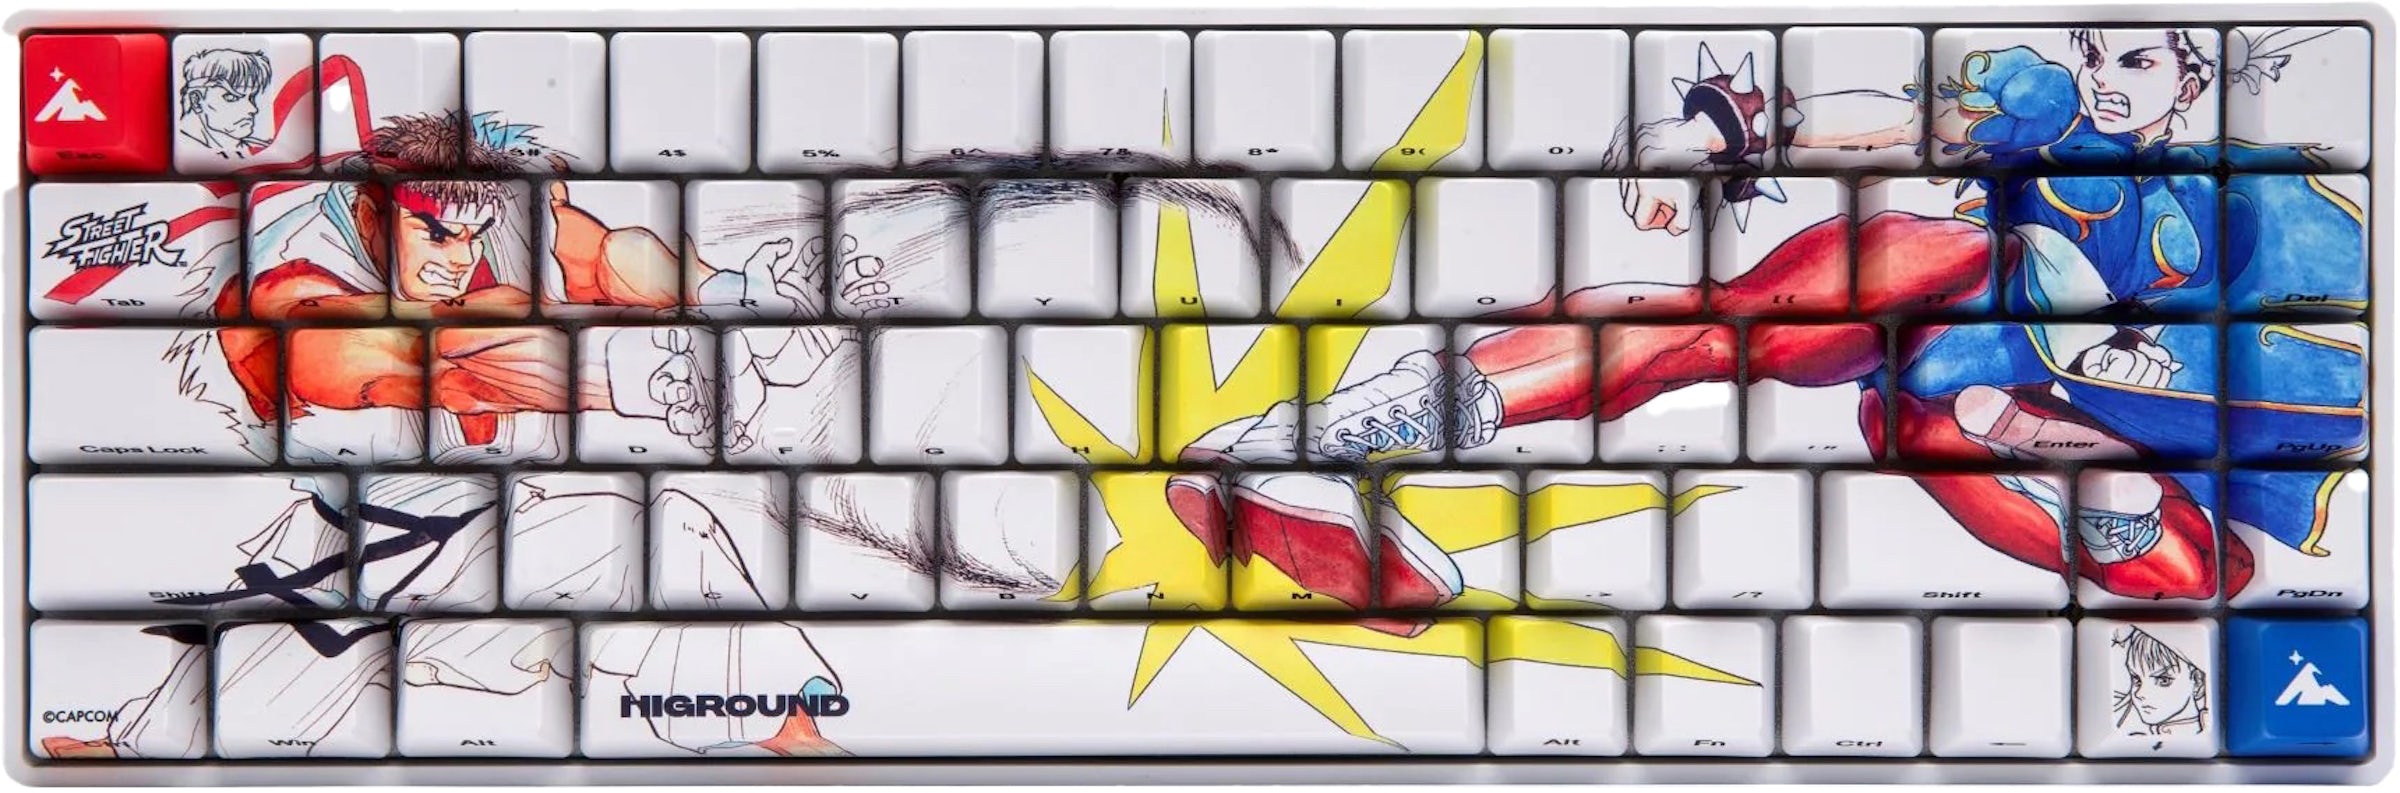 Higround x Street Fighter Victory Pose Mousepad White/Red - US